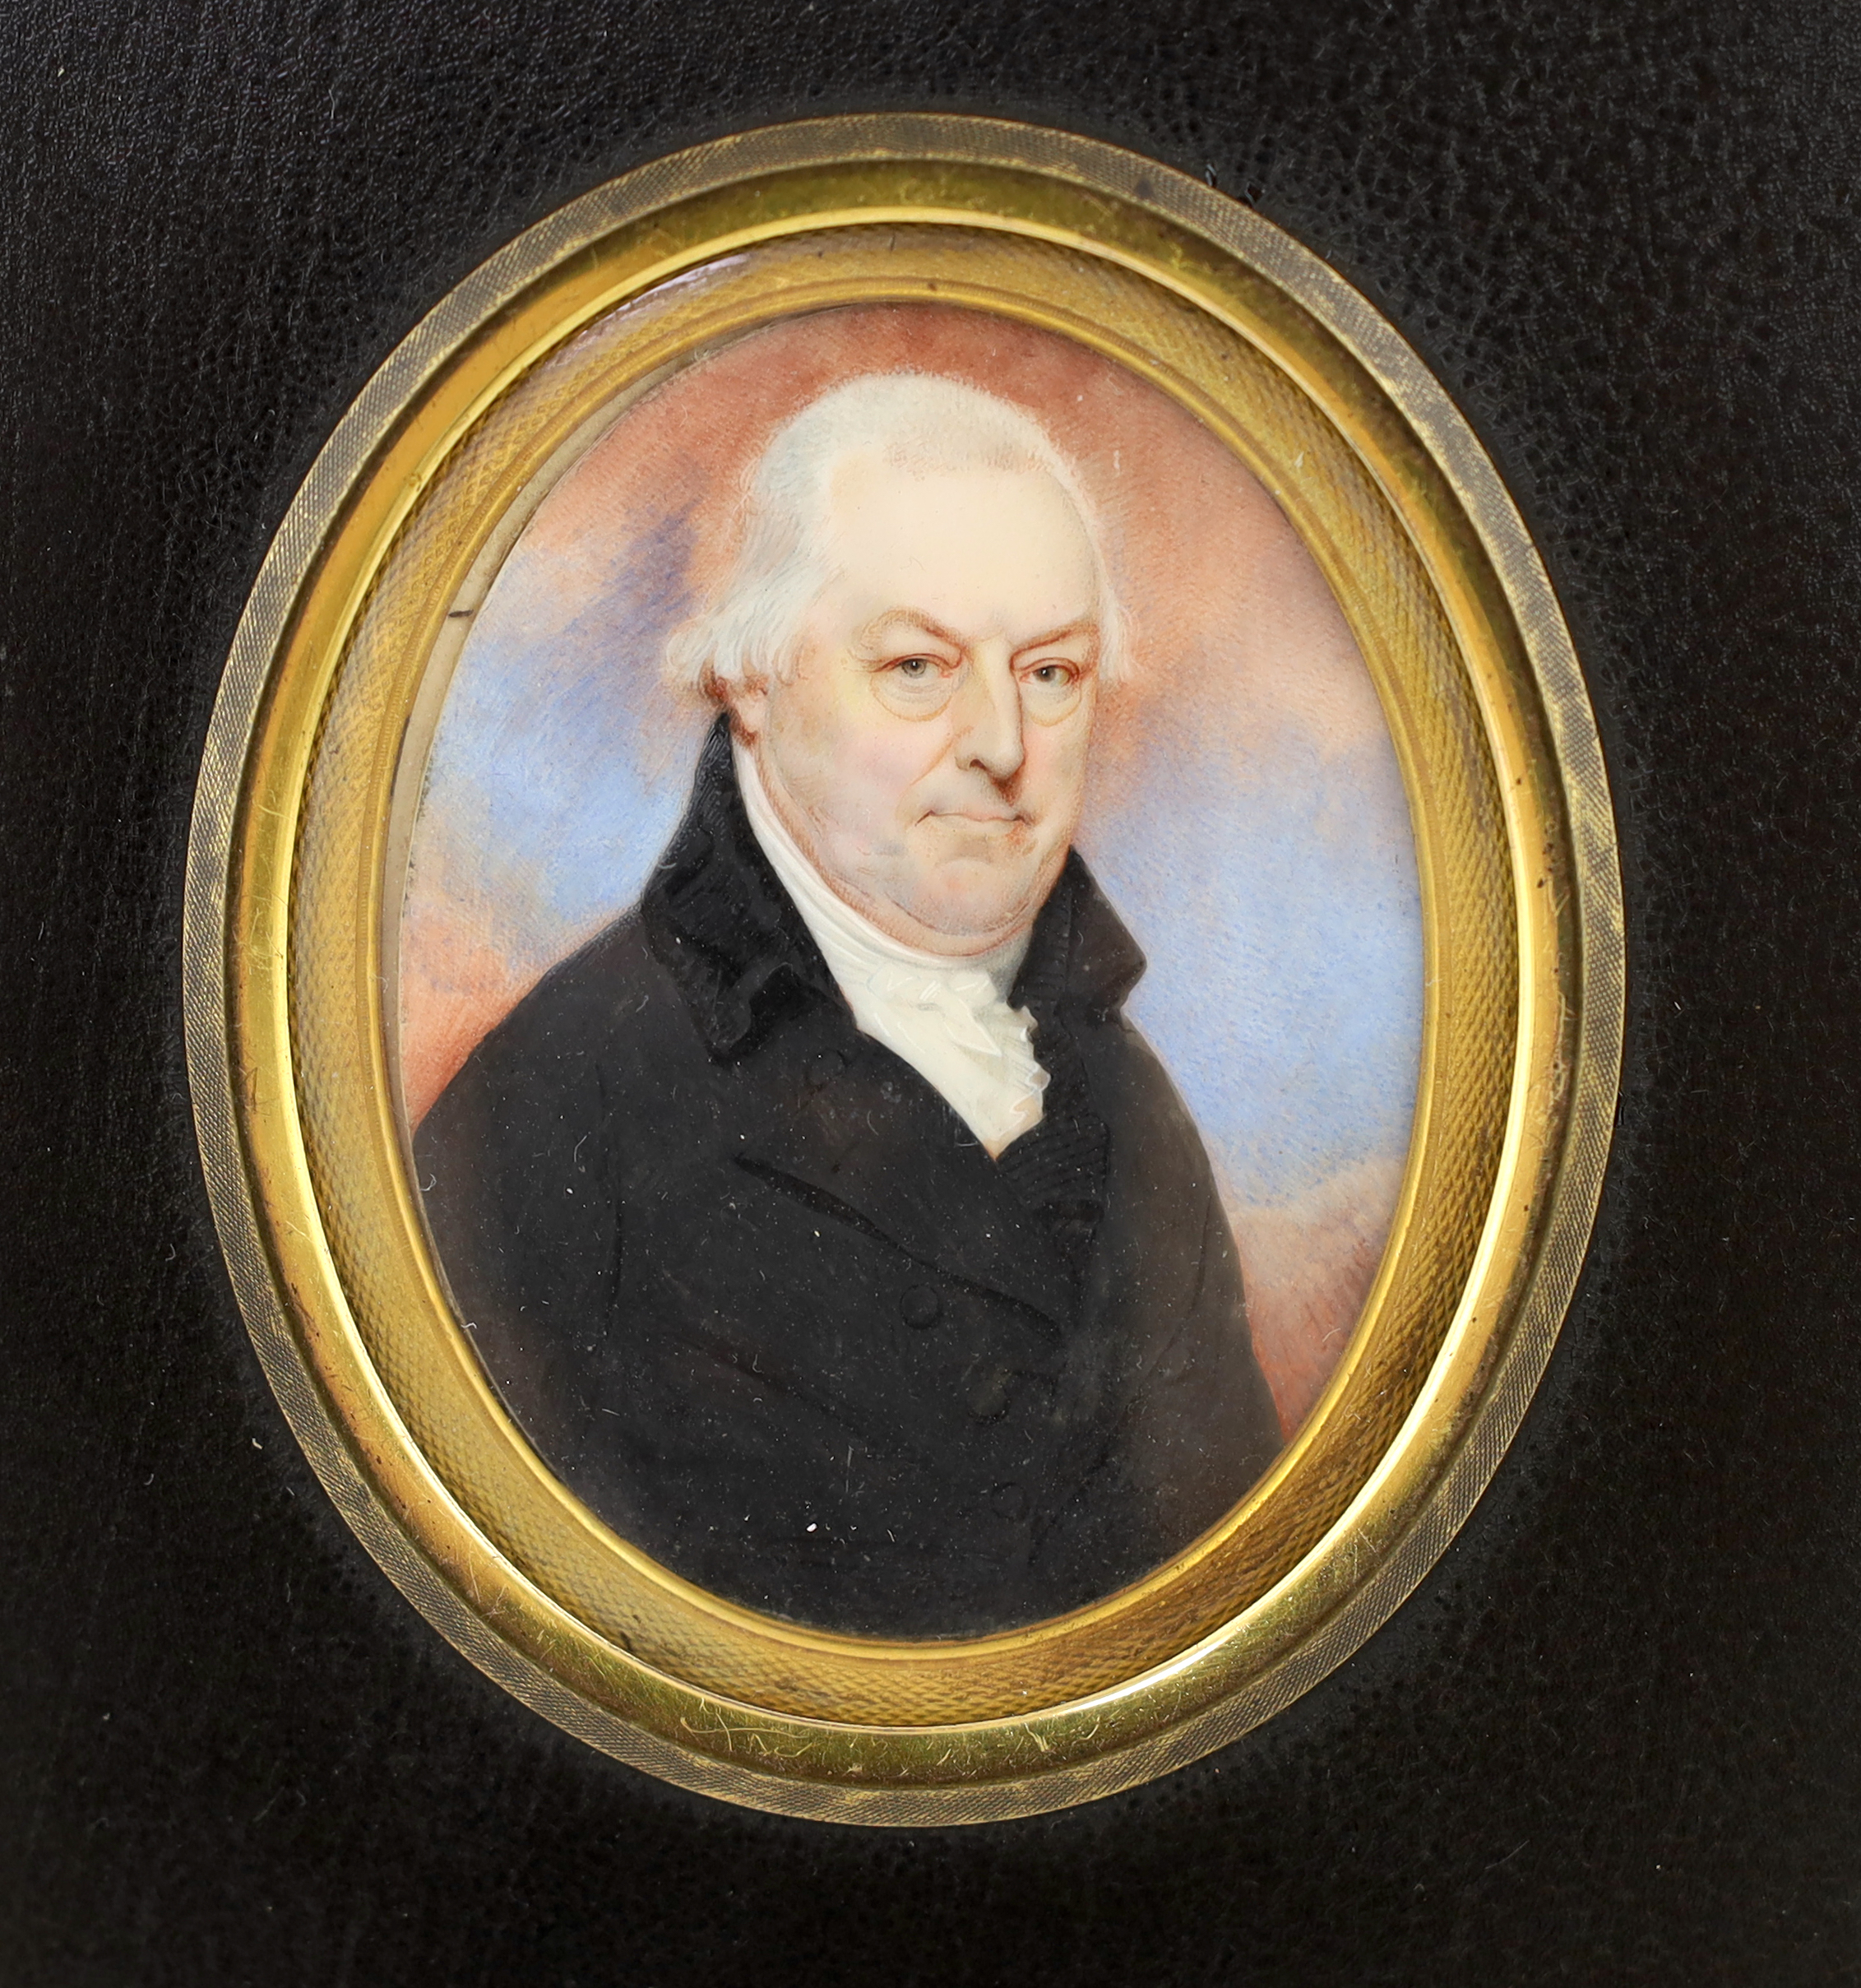 Charles Jagger (English, 1770-1827), Portrait miniature of a gentleman with tinted clouds beyond, watercolour on ivory, 6.5 x 5cm. CITES Submission reference JM8C88RW